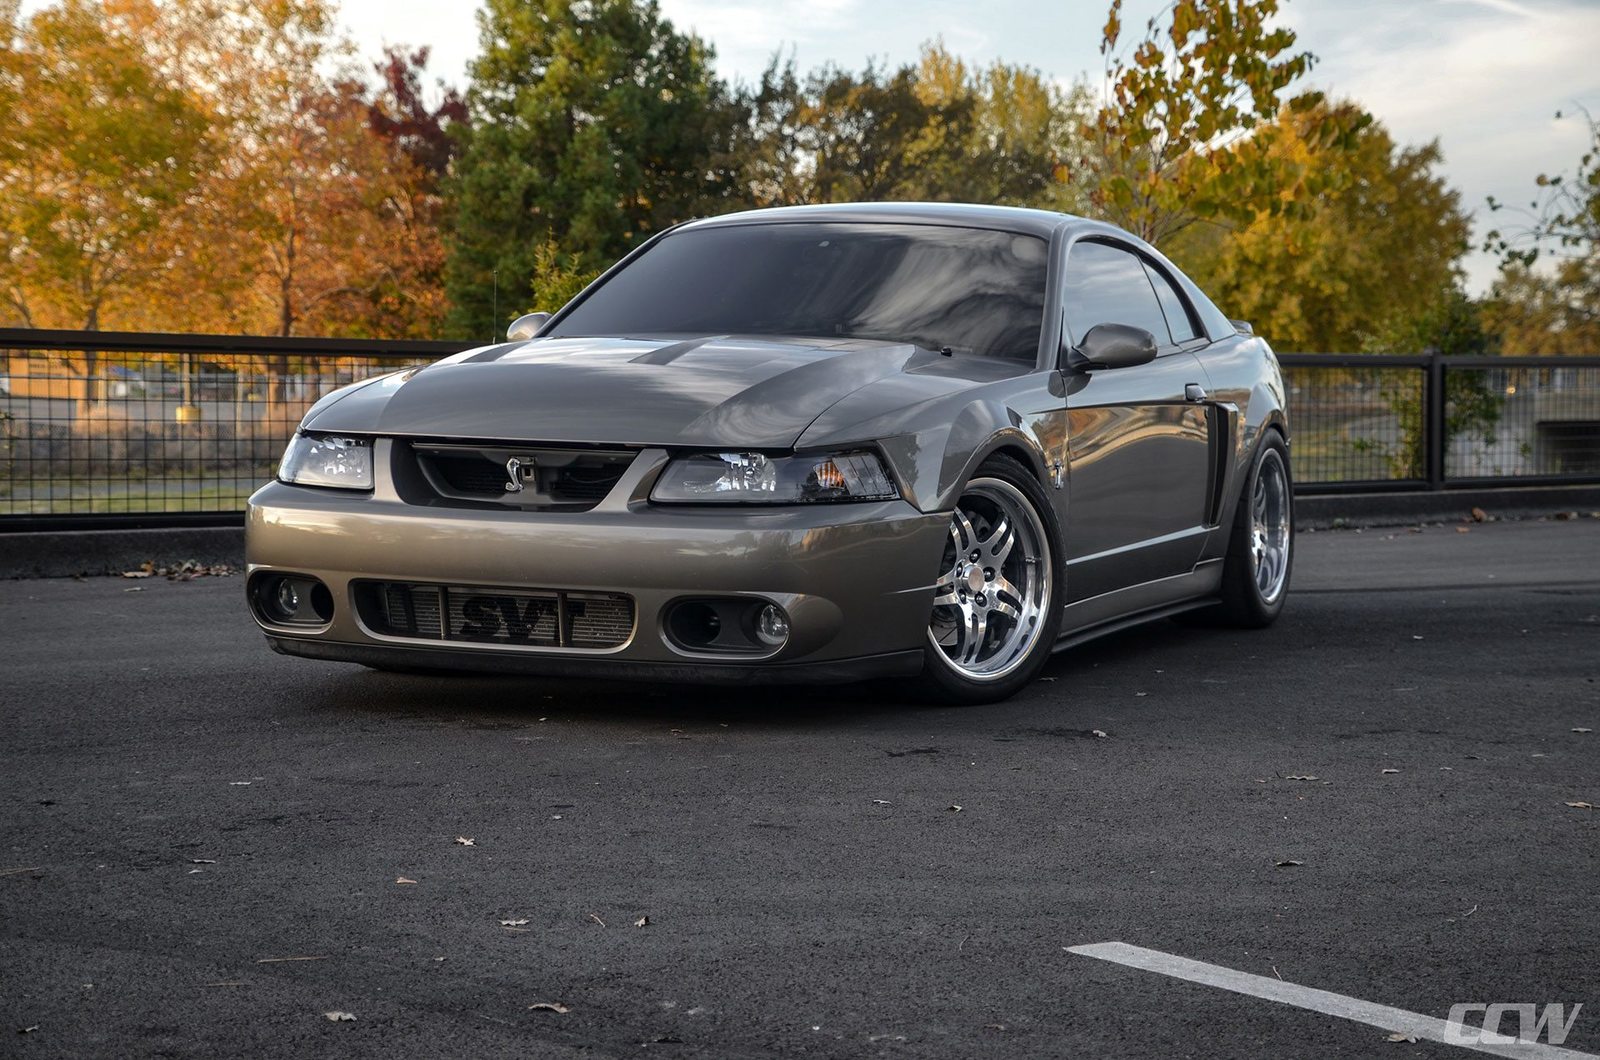 03-cobra-shelby-ford-mustang-terminator-supercharged-ccw-polished-wheels-chrome-e.jpg